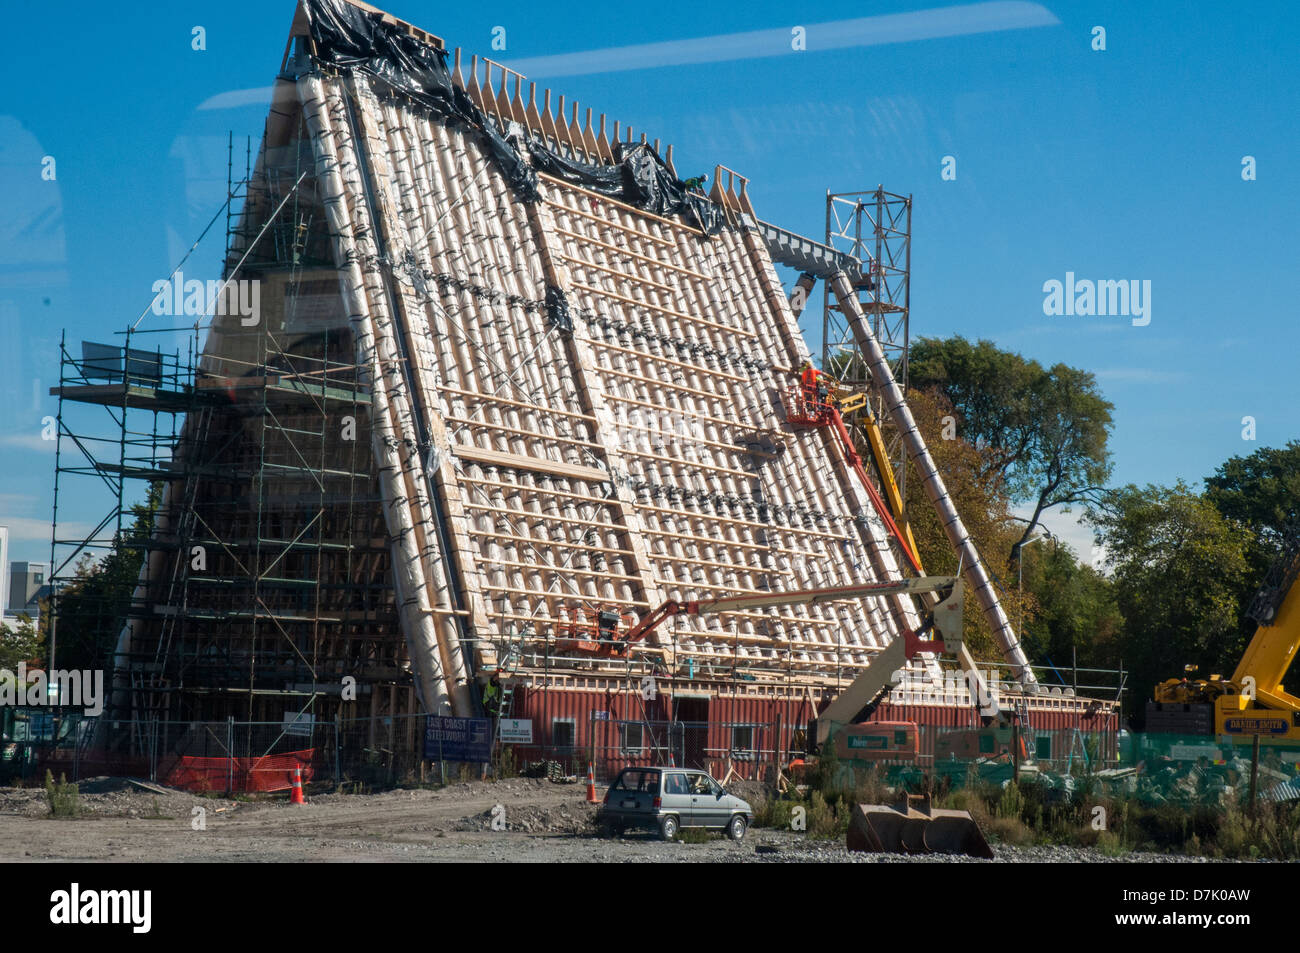 Transitional (temporary) cathedral under construction in the earthquake-affected 'Red Zone' of central Christchurch, NZ (2013) Stock Photo